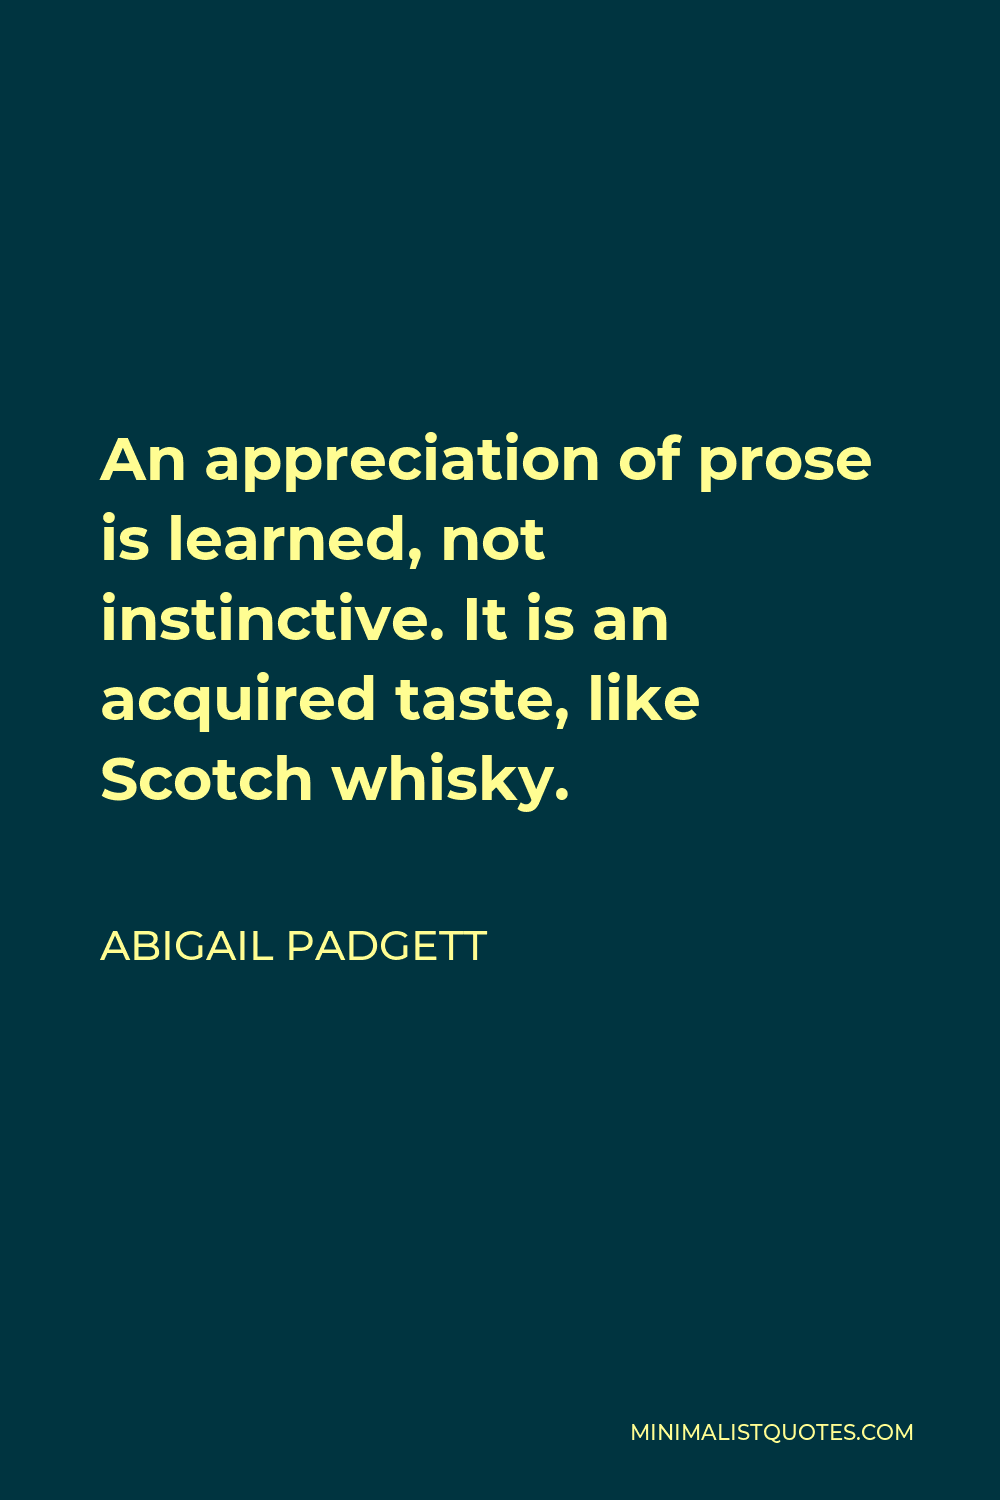 Abigail Padgett Quote - An appreciation of prose is learned, not instinctive. It is an acquired taste, like Scotch whisky.